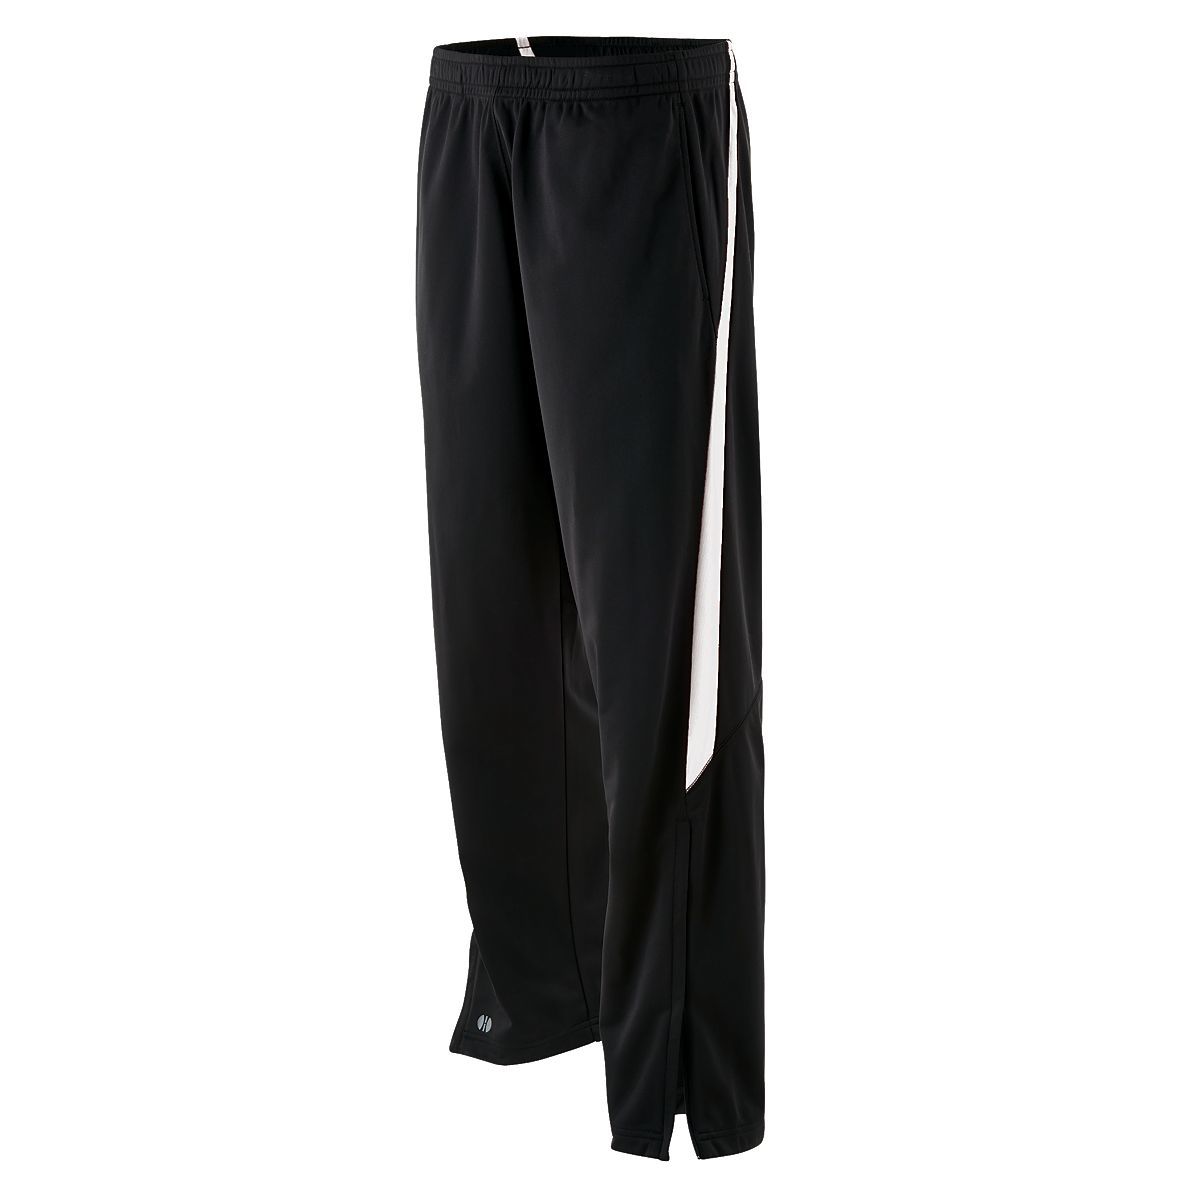 Holloway Determination Pant in Black/White  -Part of the Adult, Adult-Pants, Pants, Holloway product lines at KanaleyCreations.com